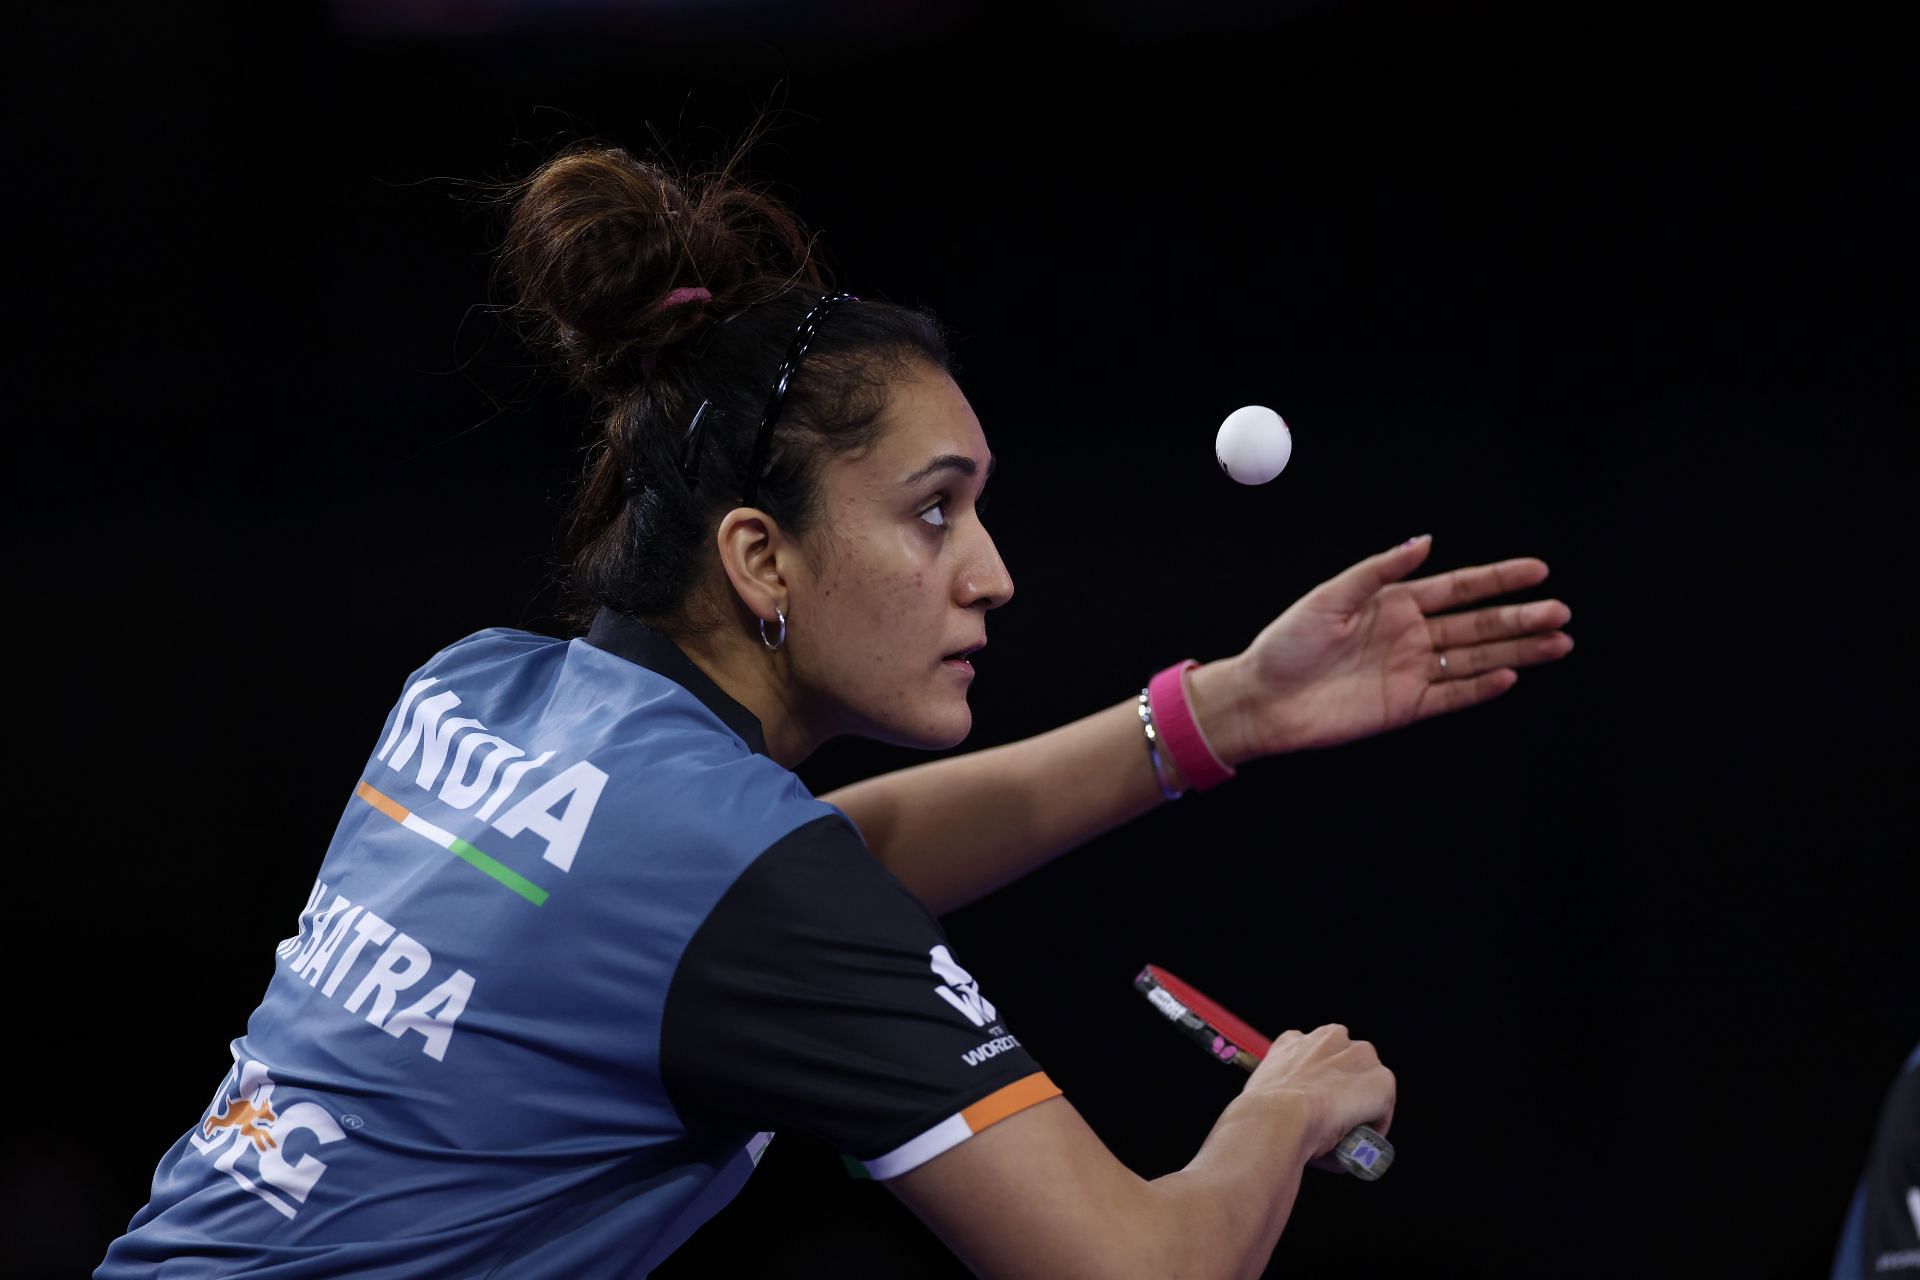 Manika Batra in action at the World Table Tennis Championships. (PC: Getty Images)